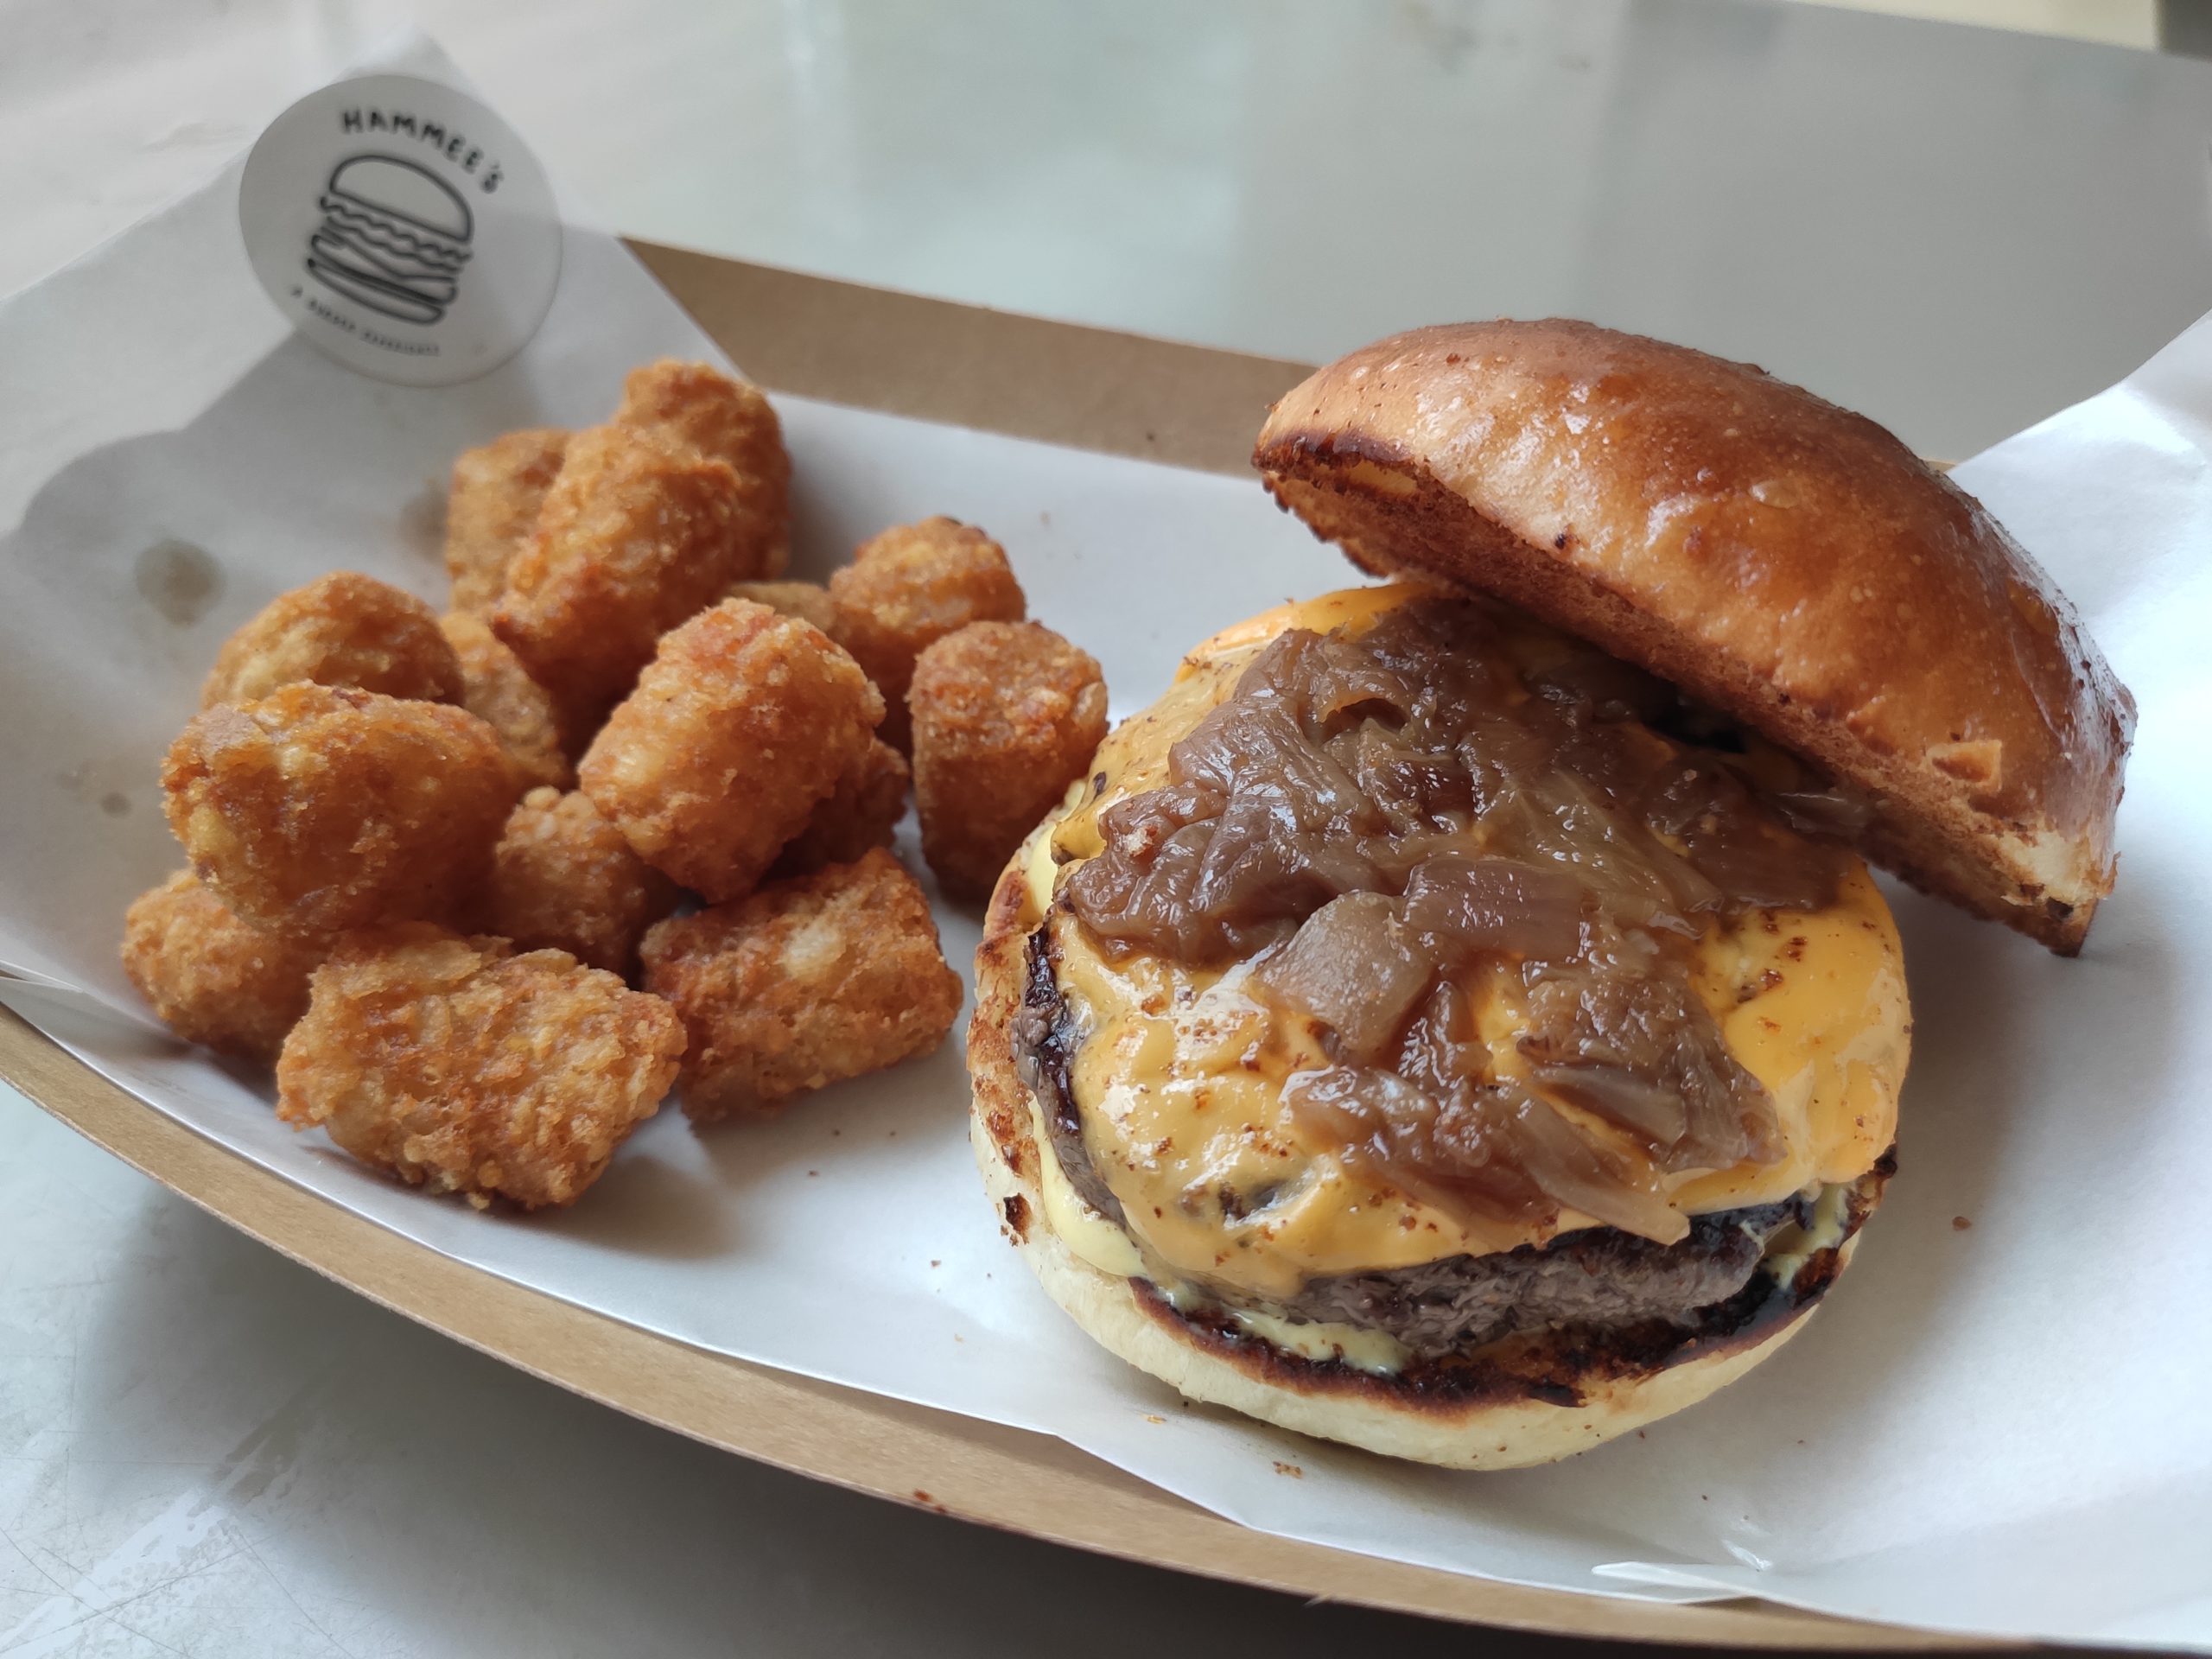 Hammee's: Classic Cheeseburger with Tater Tots